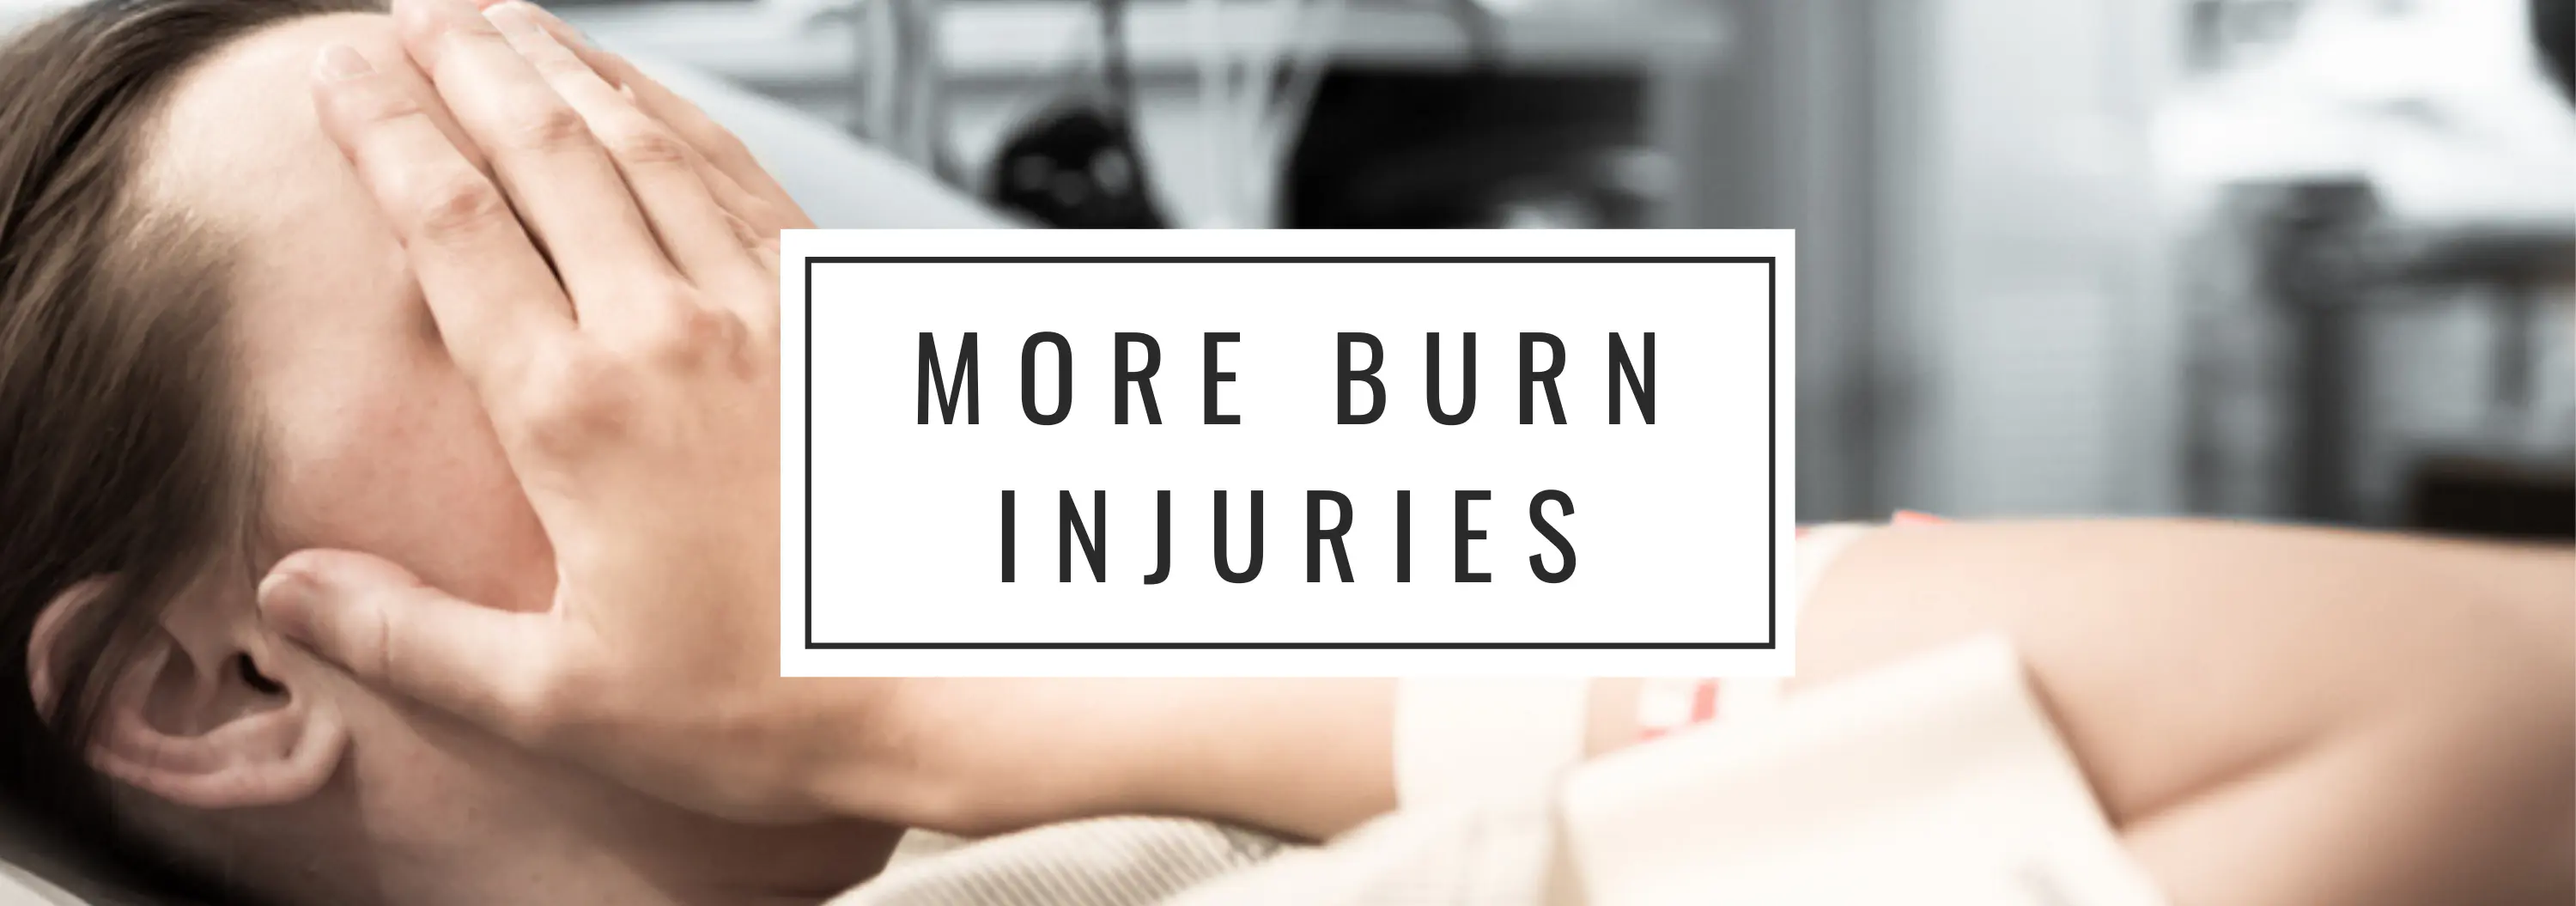 burn injuries from intant pot exploded